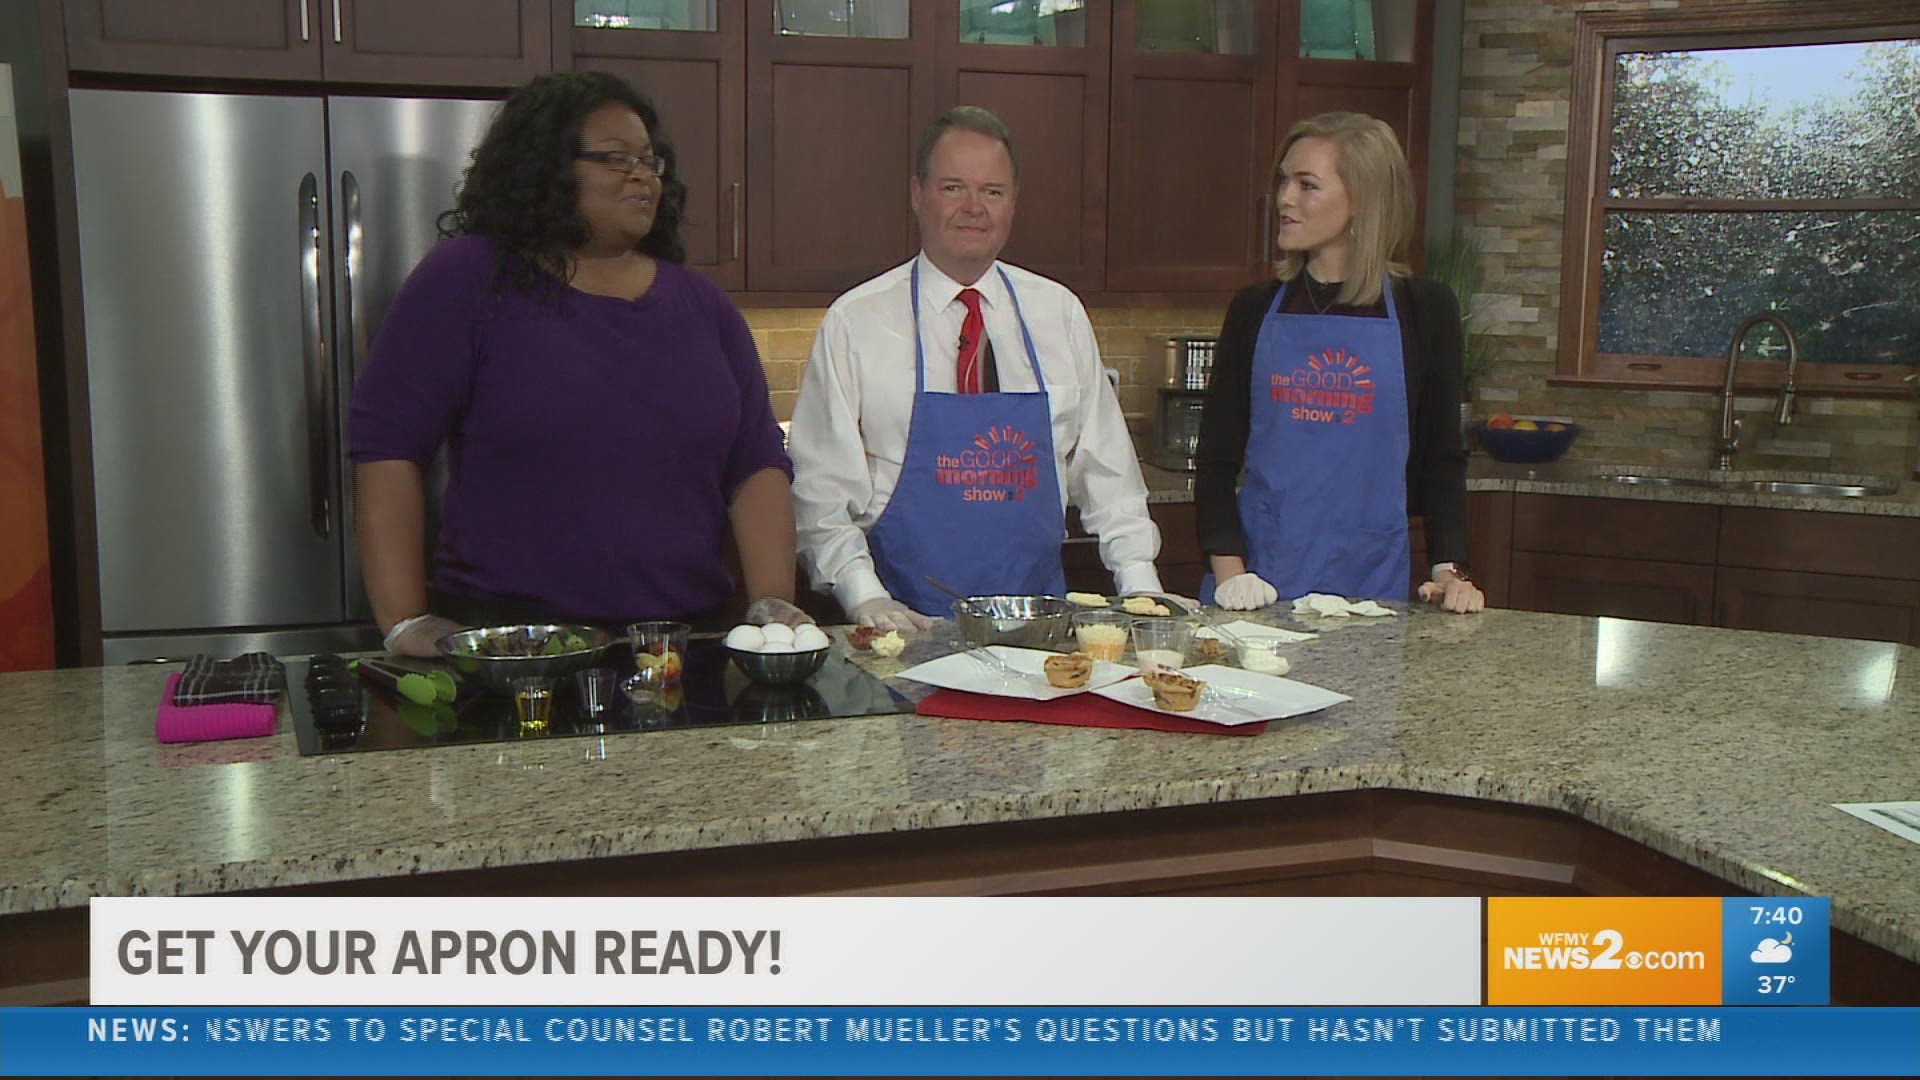 Chef Felicia joins us in the News2 kitchen this morning to create a healthy quiche meal.